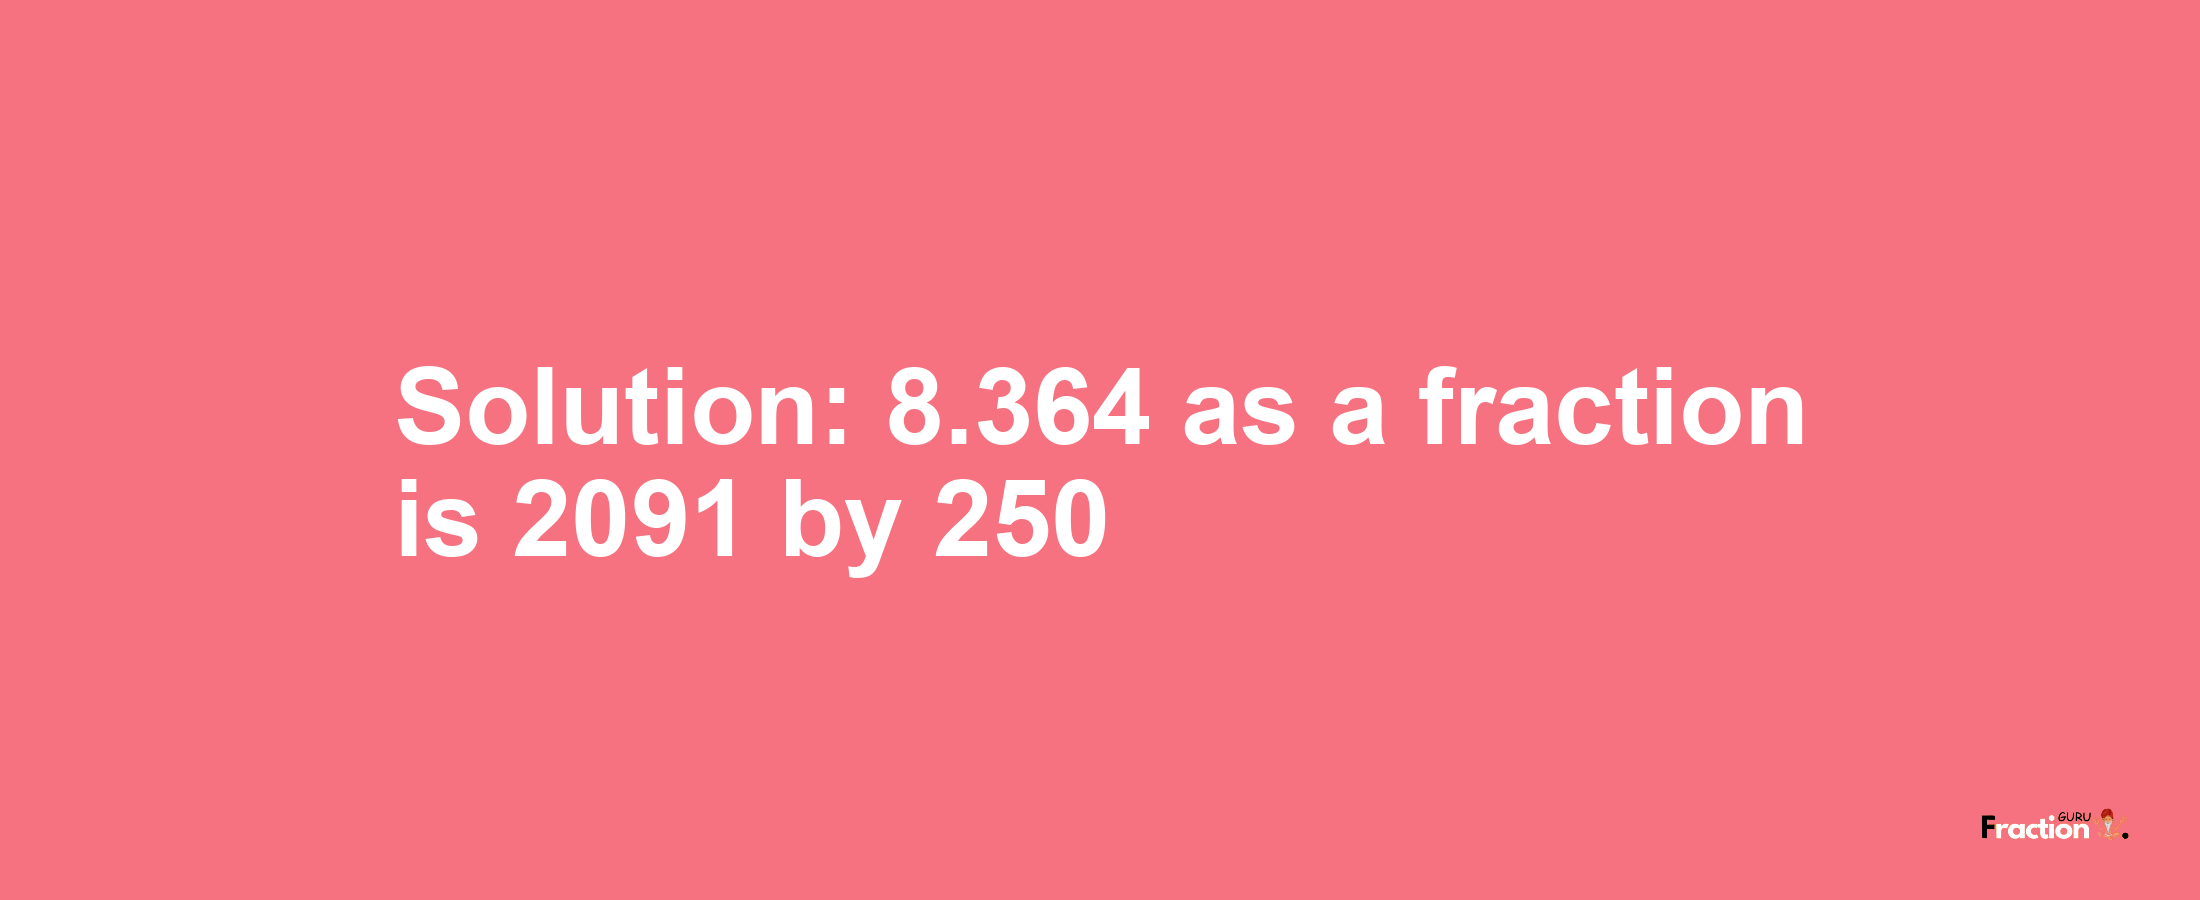 Solution:8.364 as a fraction is 2091/250